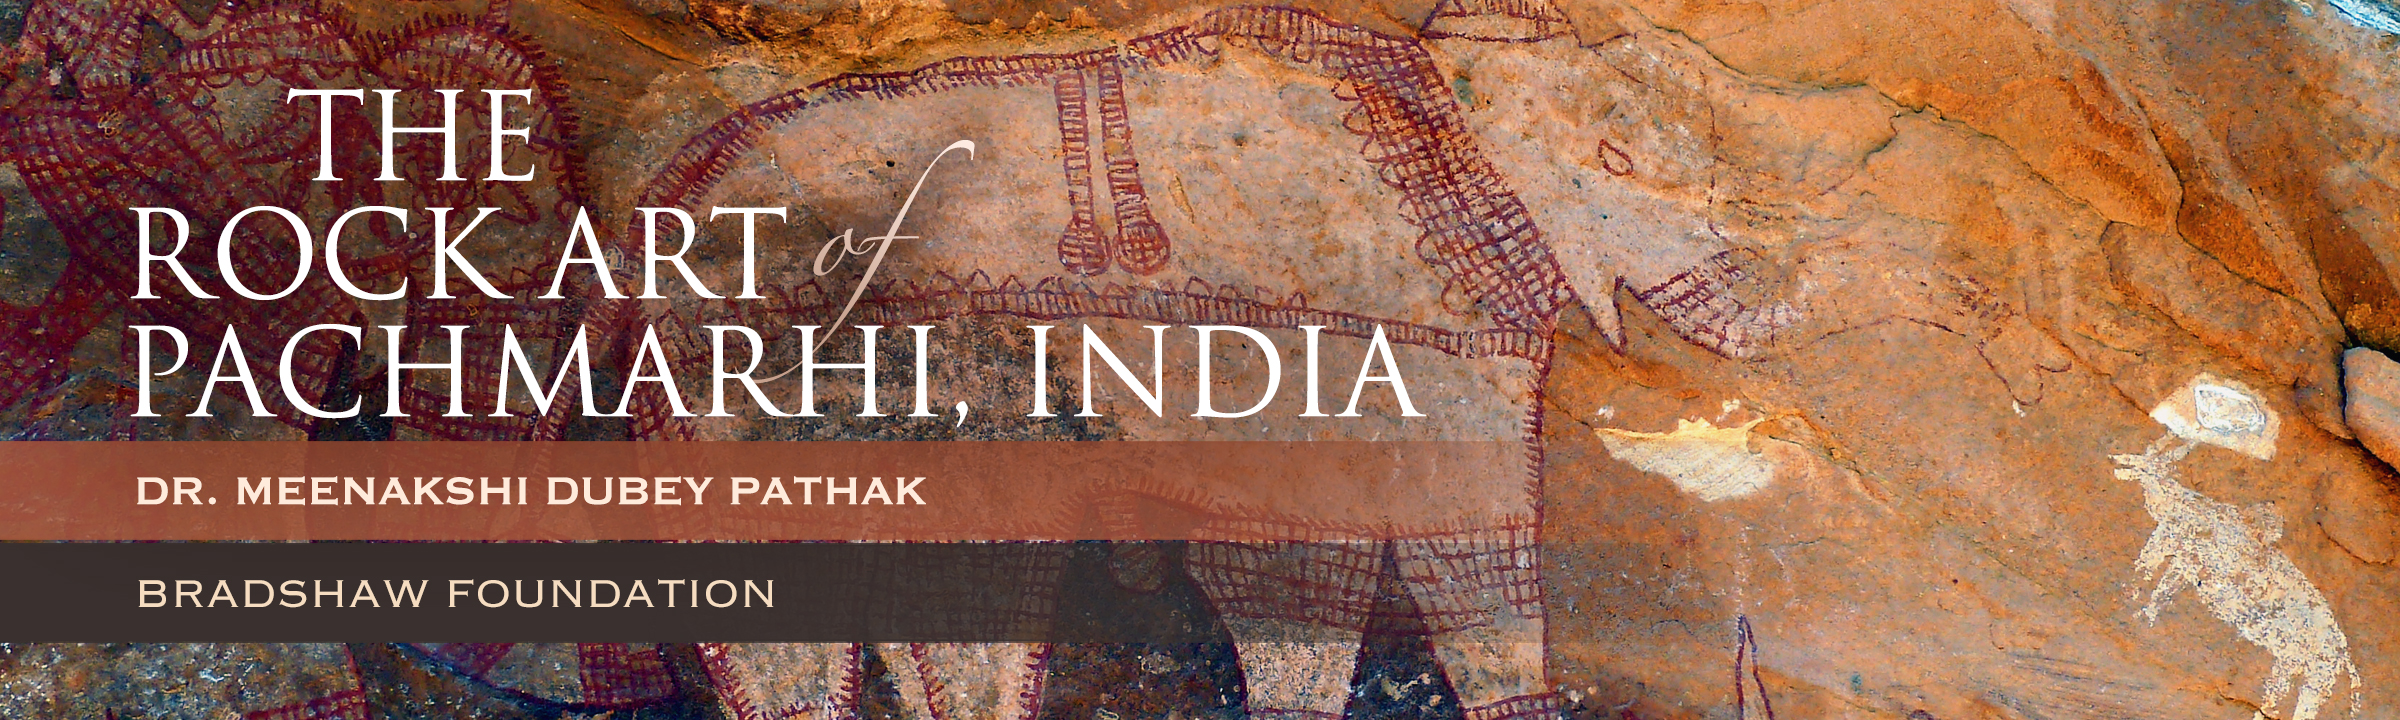 The Prehistoric Paintings of the Pachmarhi Hills